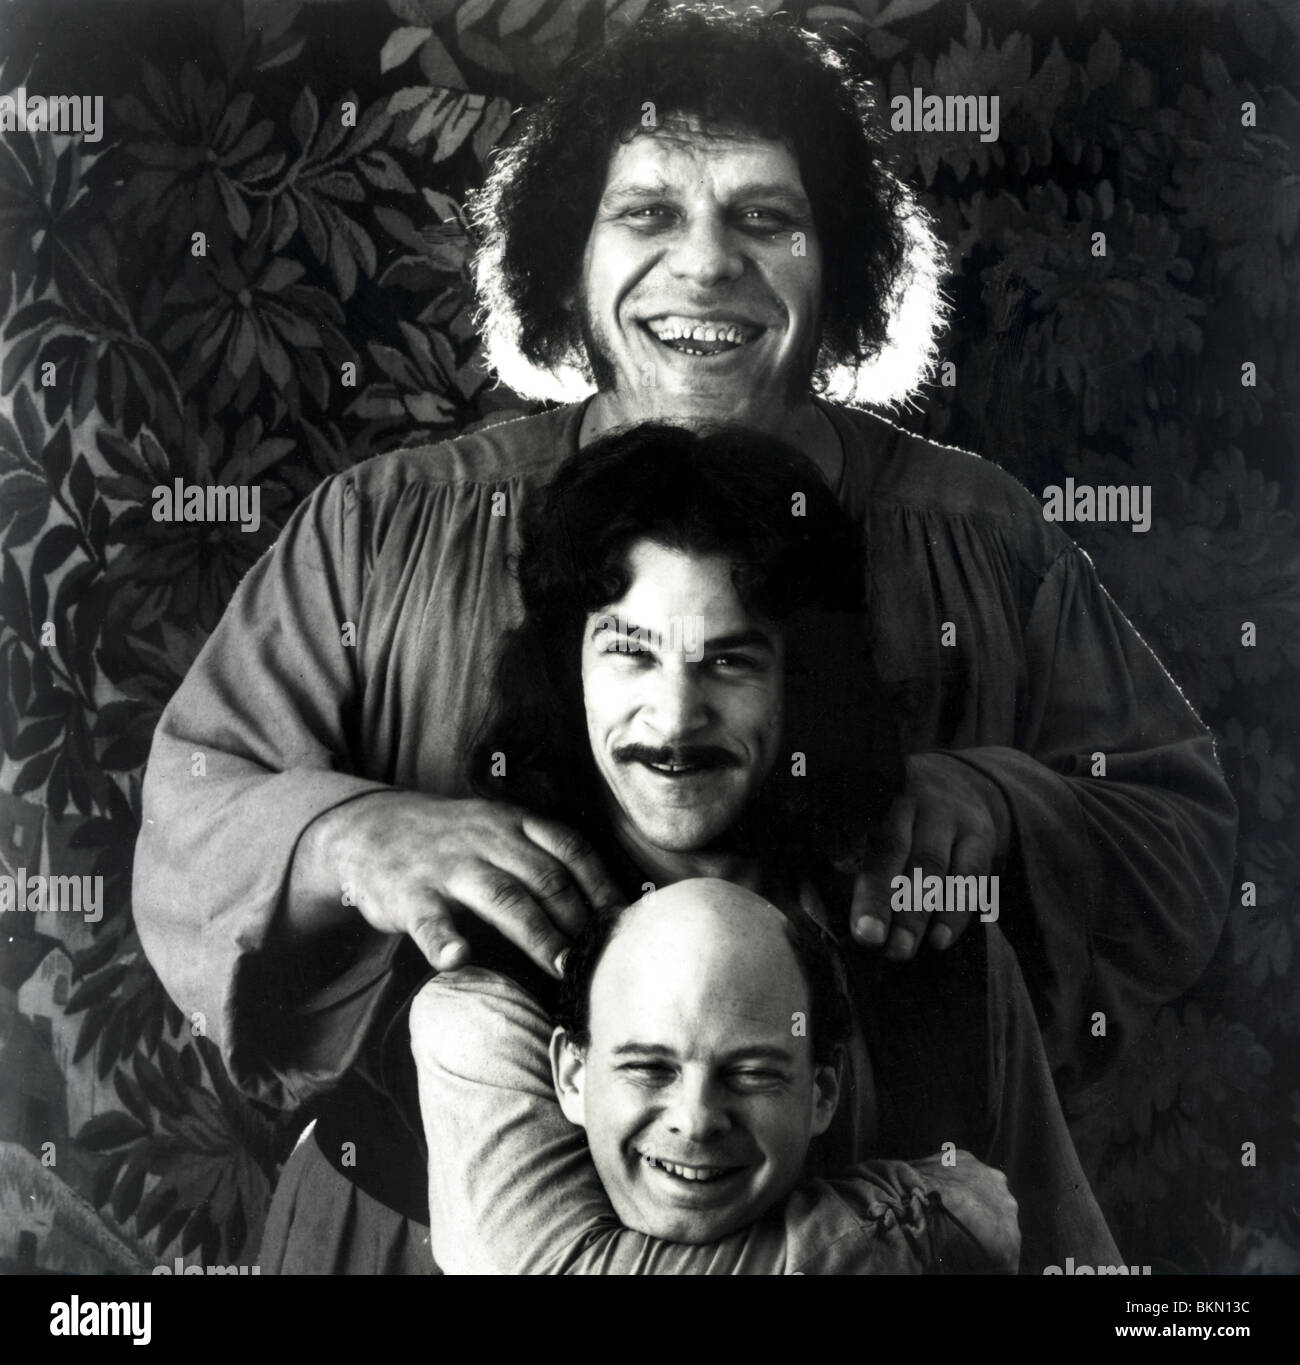 THE PRINCESS BRIDE (1987) ANDRE THE GIANT, MANDY PATINKIN, WALLACE SHAWN PRB 006 P Stock Photo